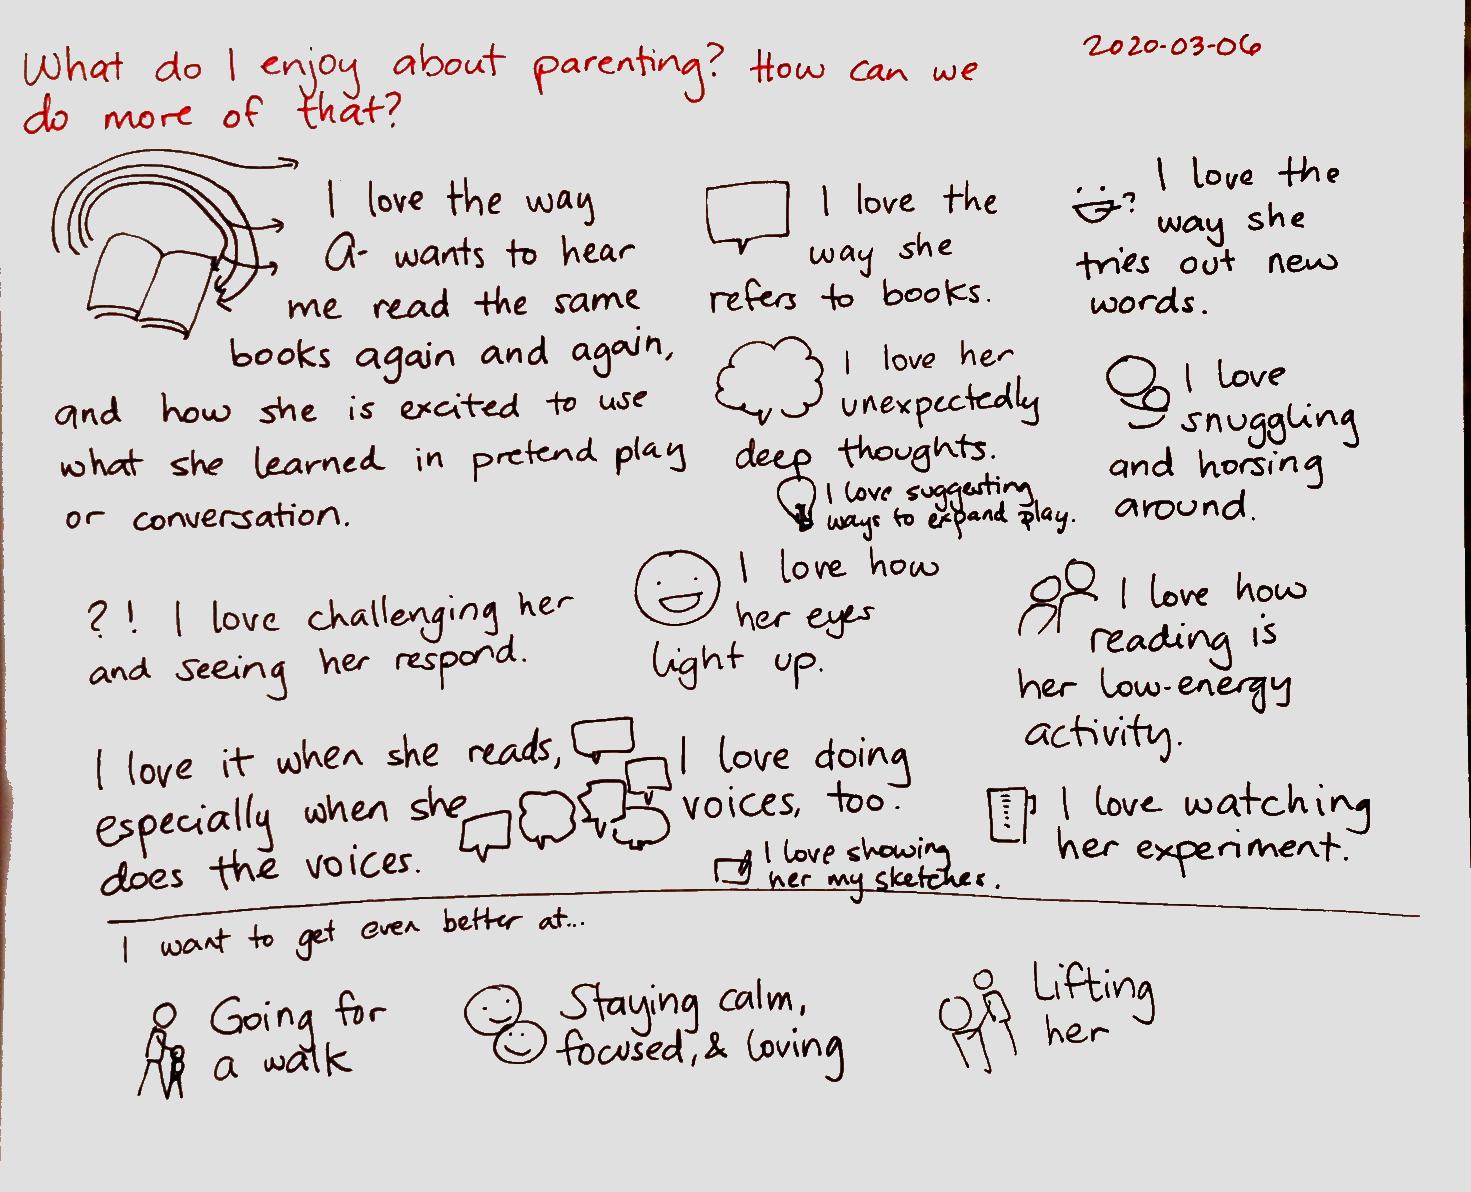 2020-03-06 What do I enjoy about parenting #parenting.png